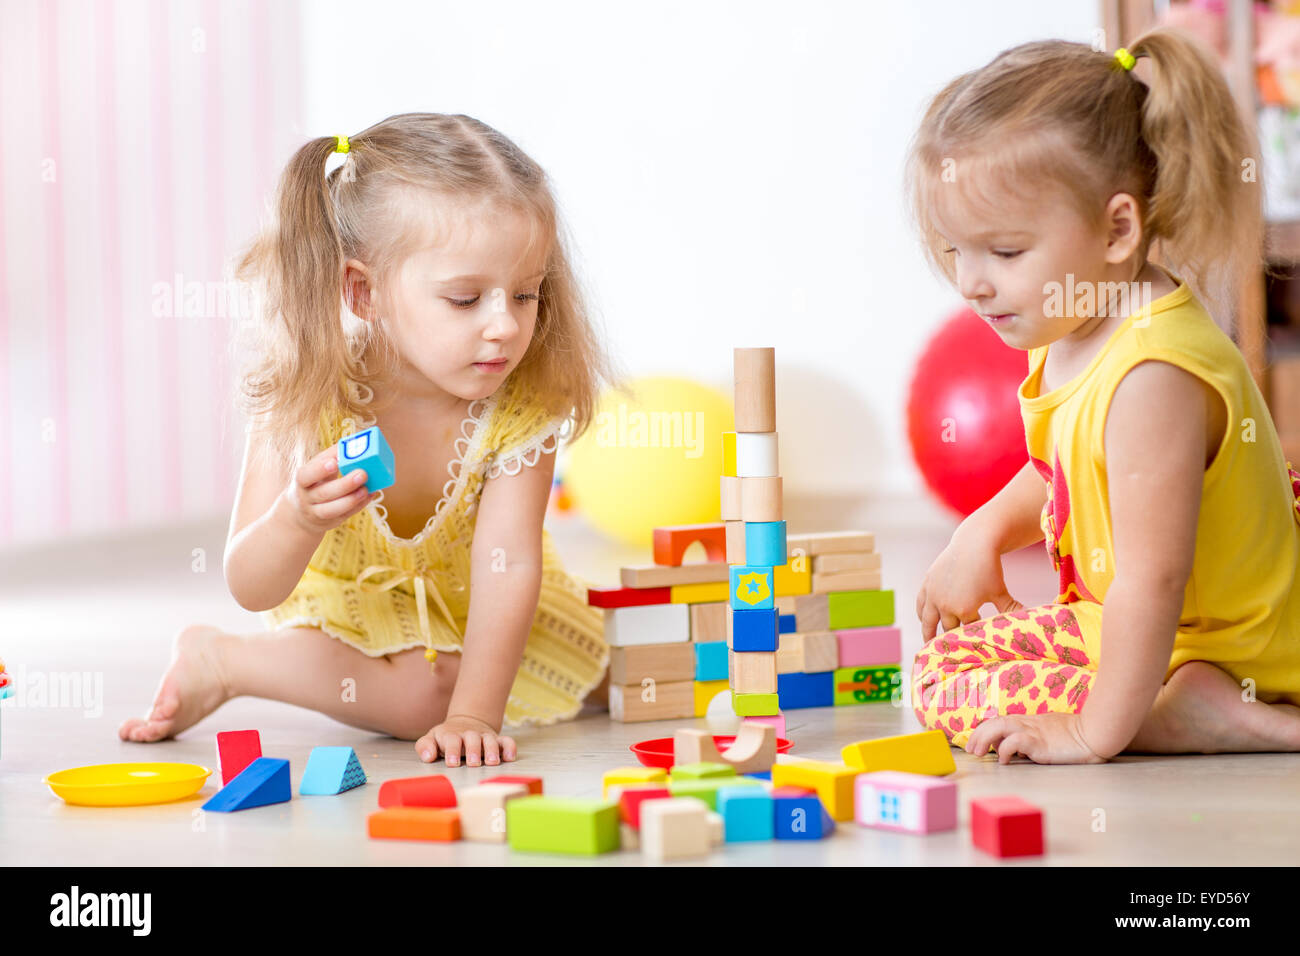 children playing wooden toys at home Stock Photo